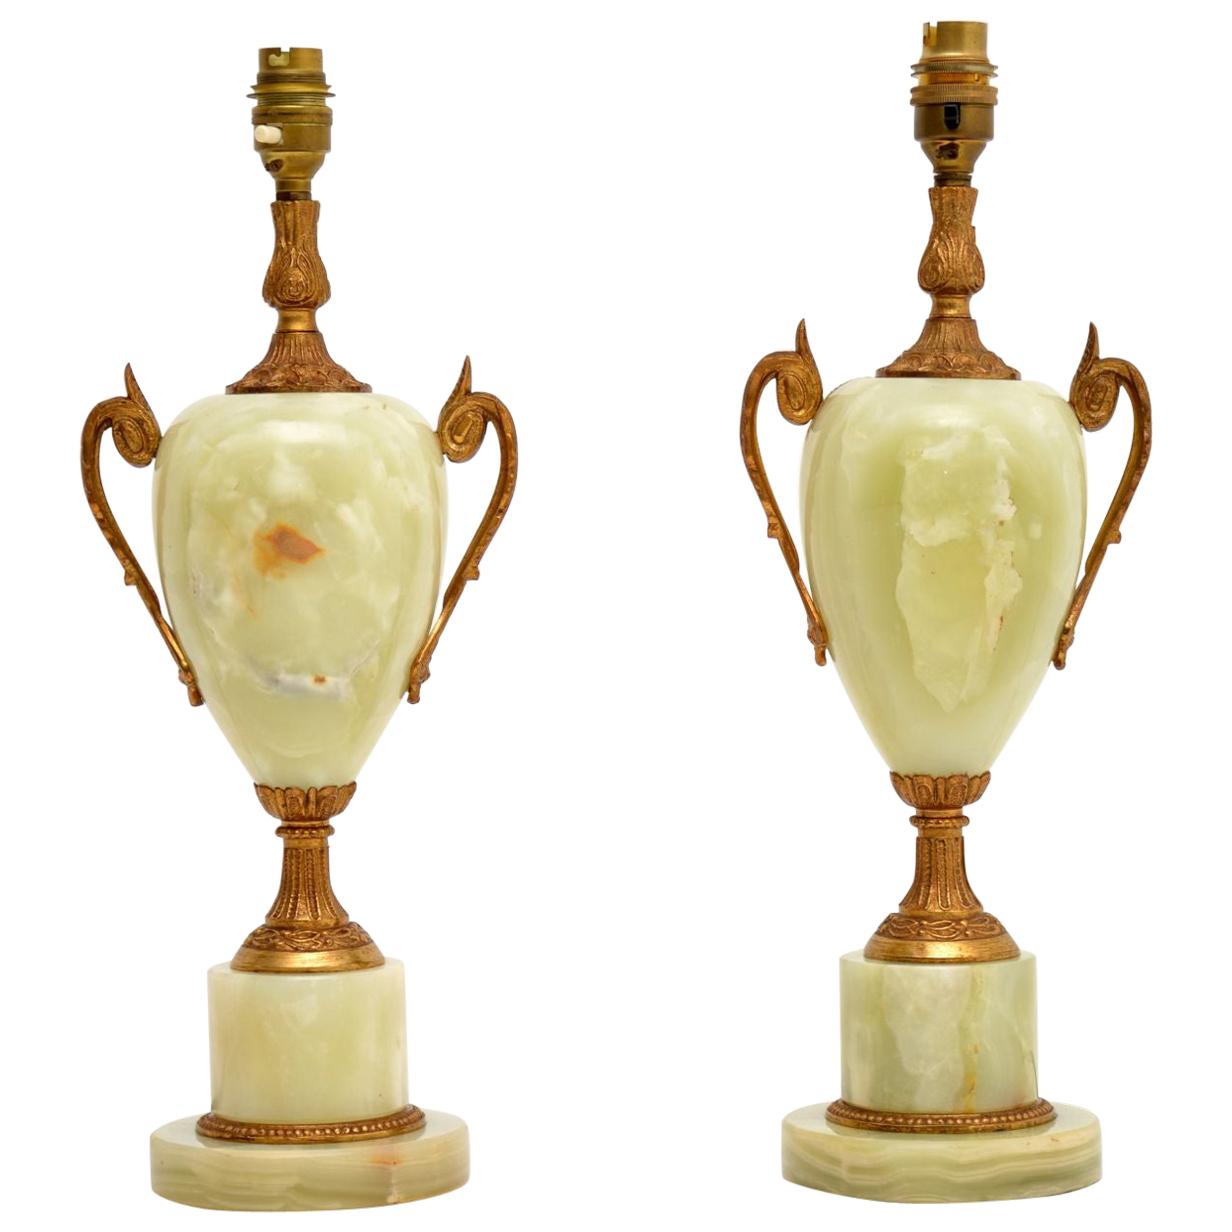 Pair of Antique Onyx Table Lamps